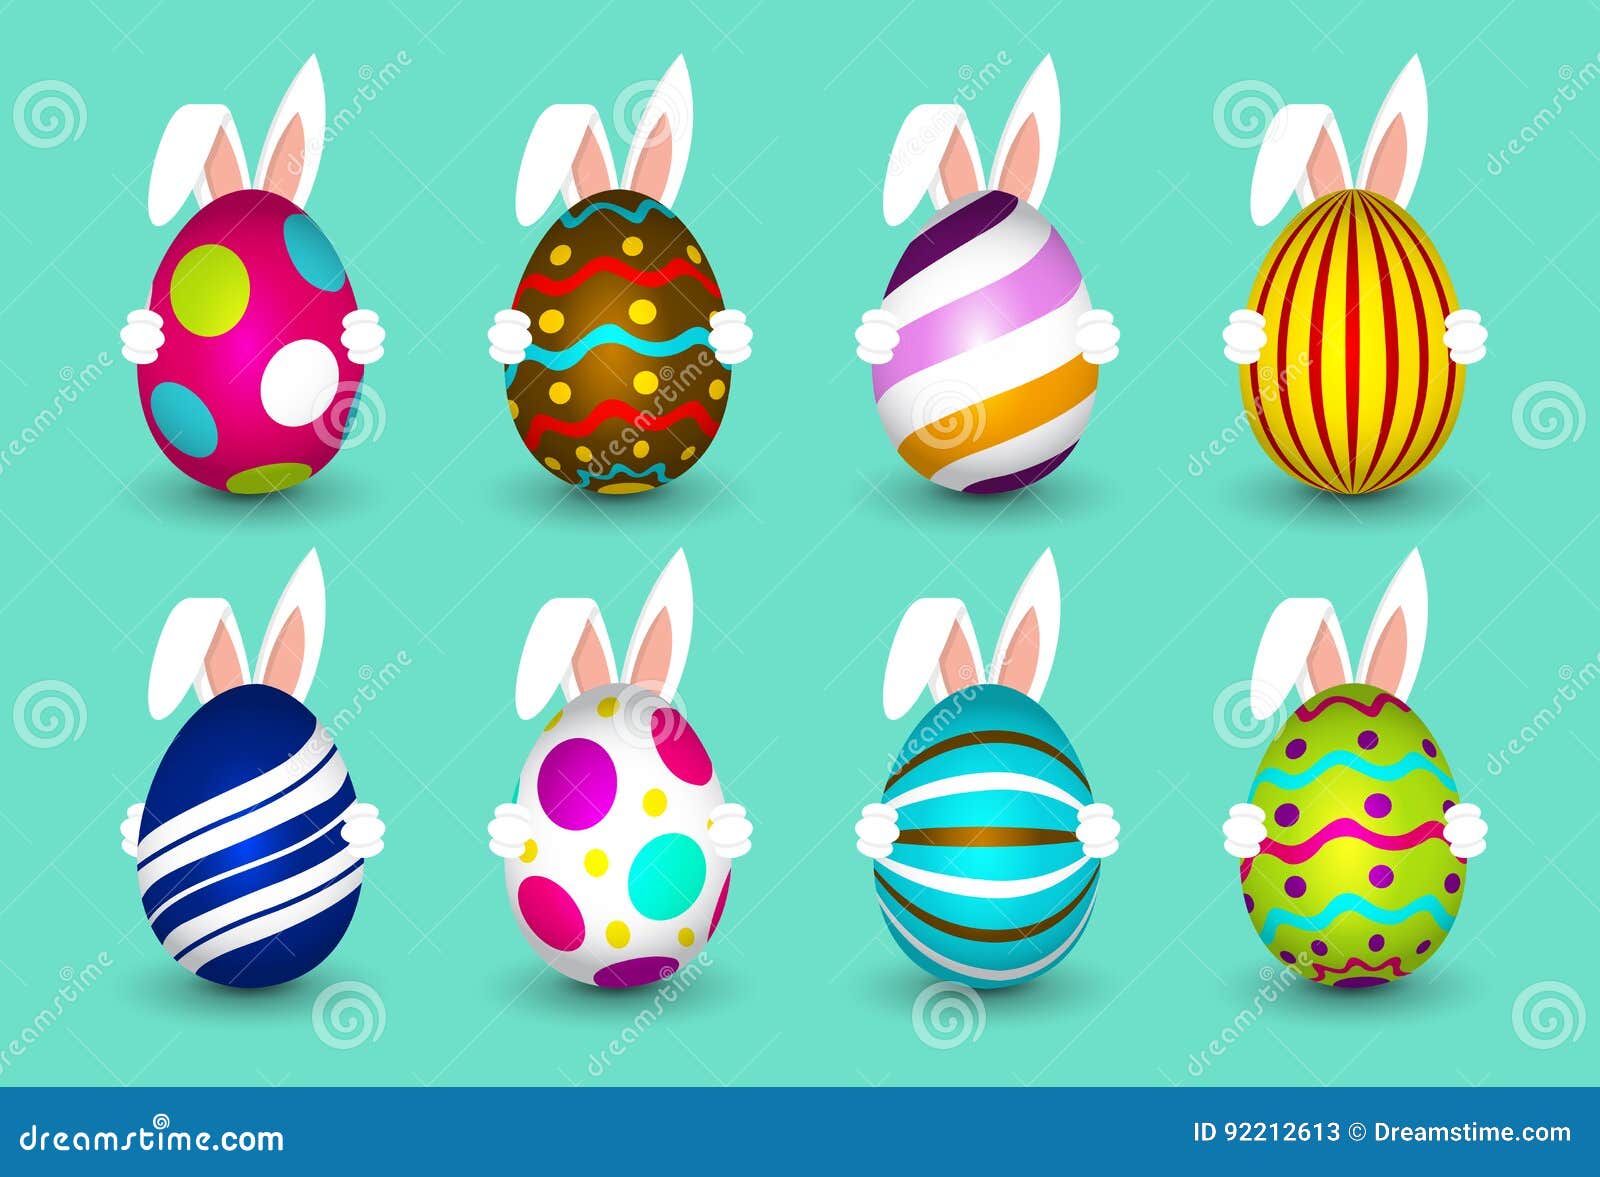 Easter Eggs   Easter Bunny   Deliver Eggs   Happy Easter Stock ...